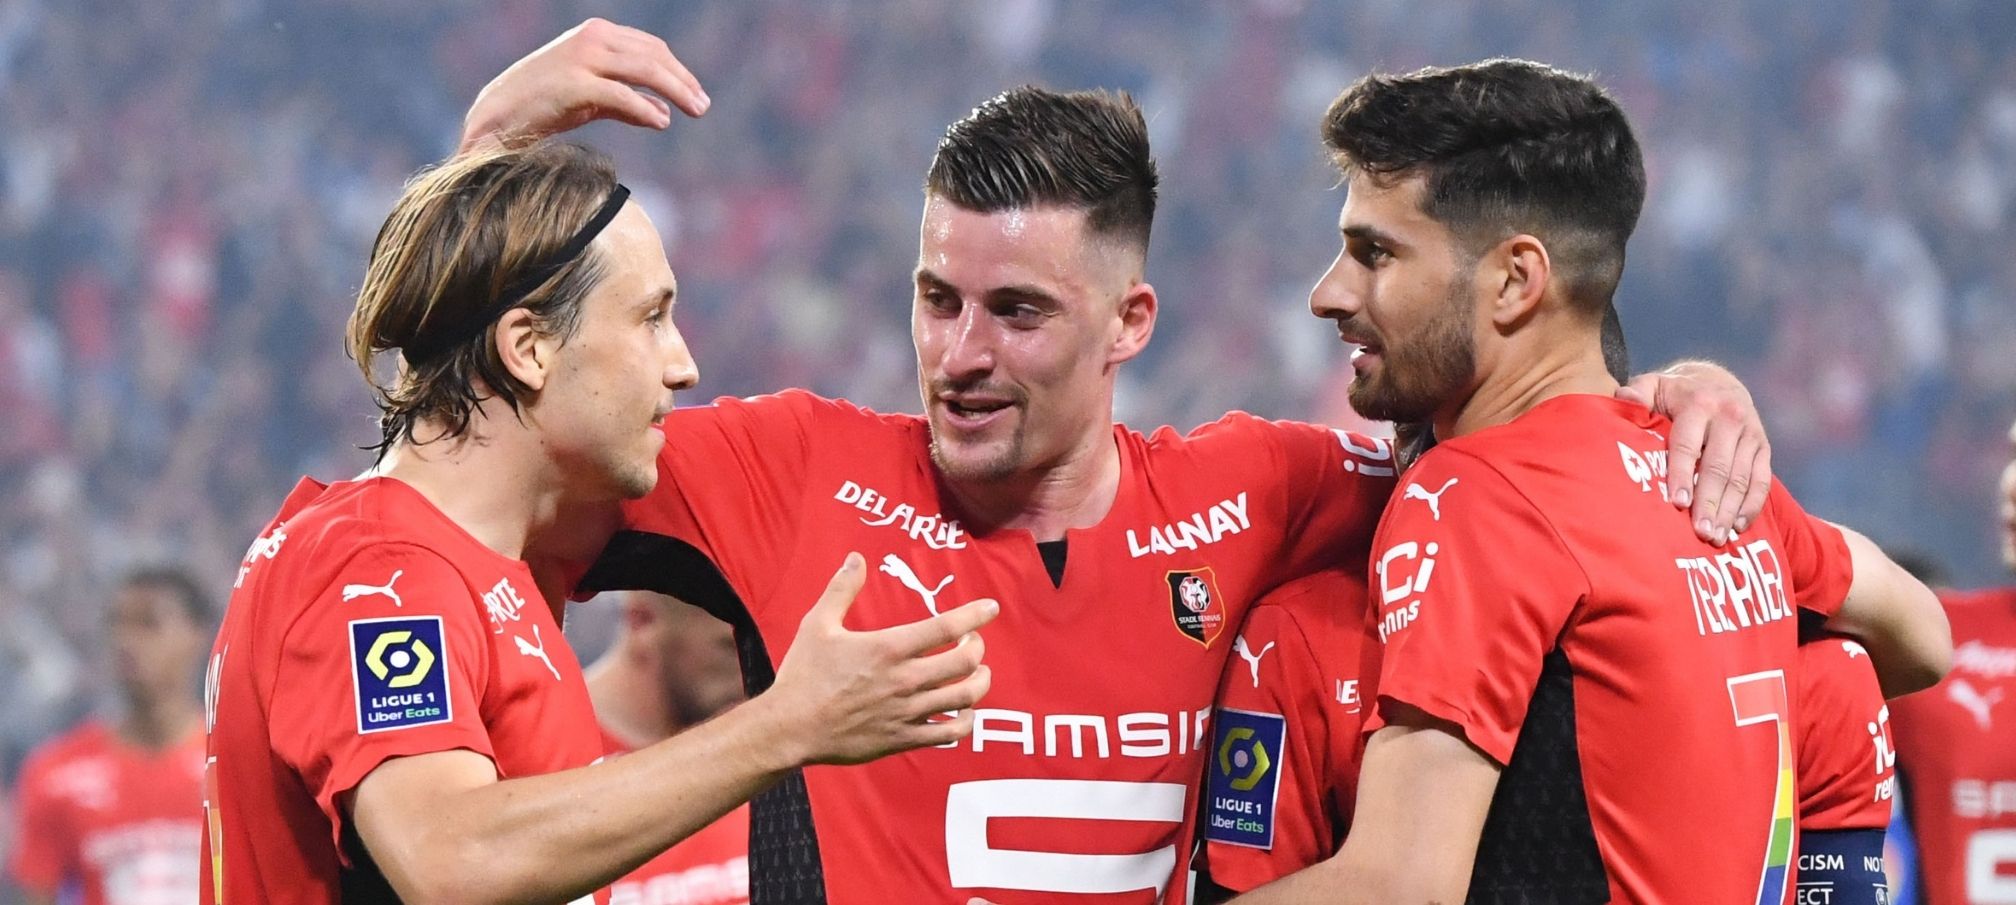 Lille - Rennes preview: 'Control what you can' says Genesio